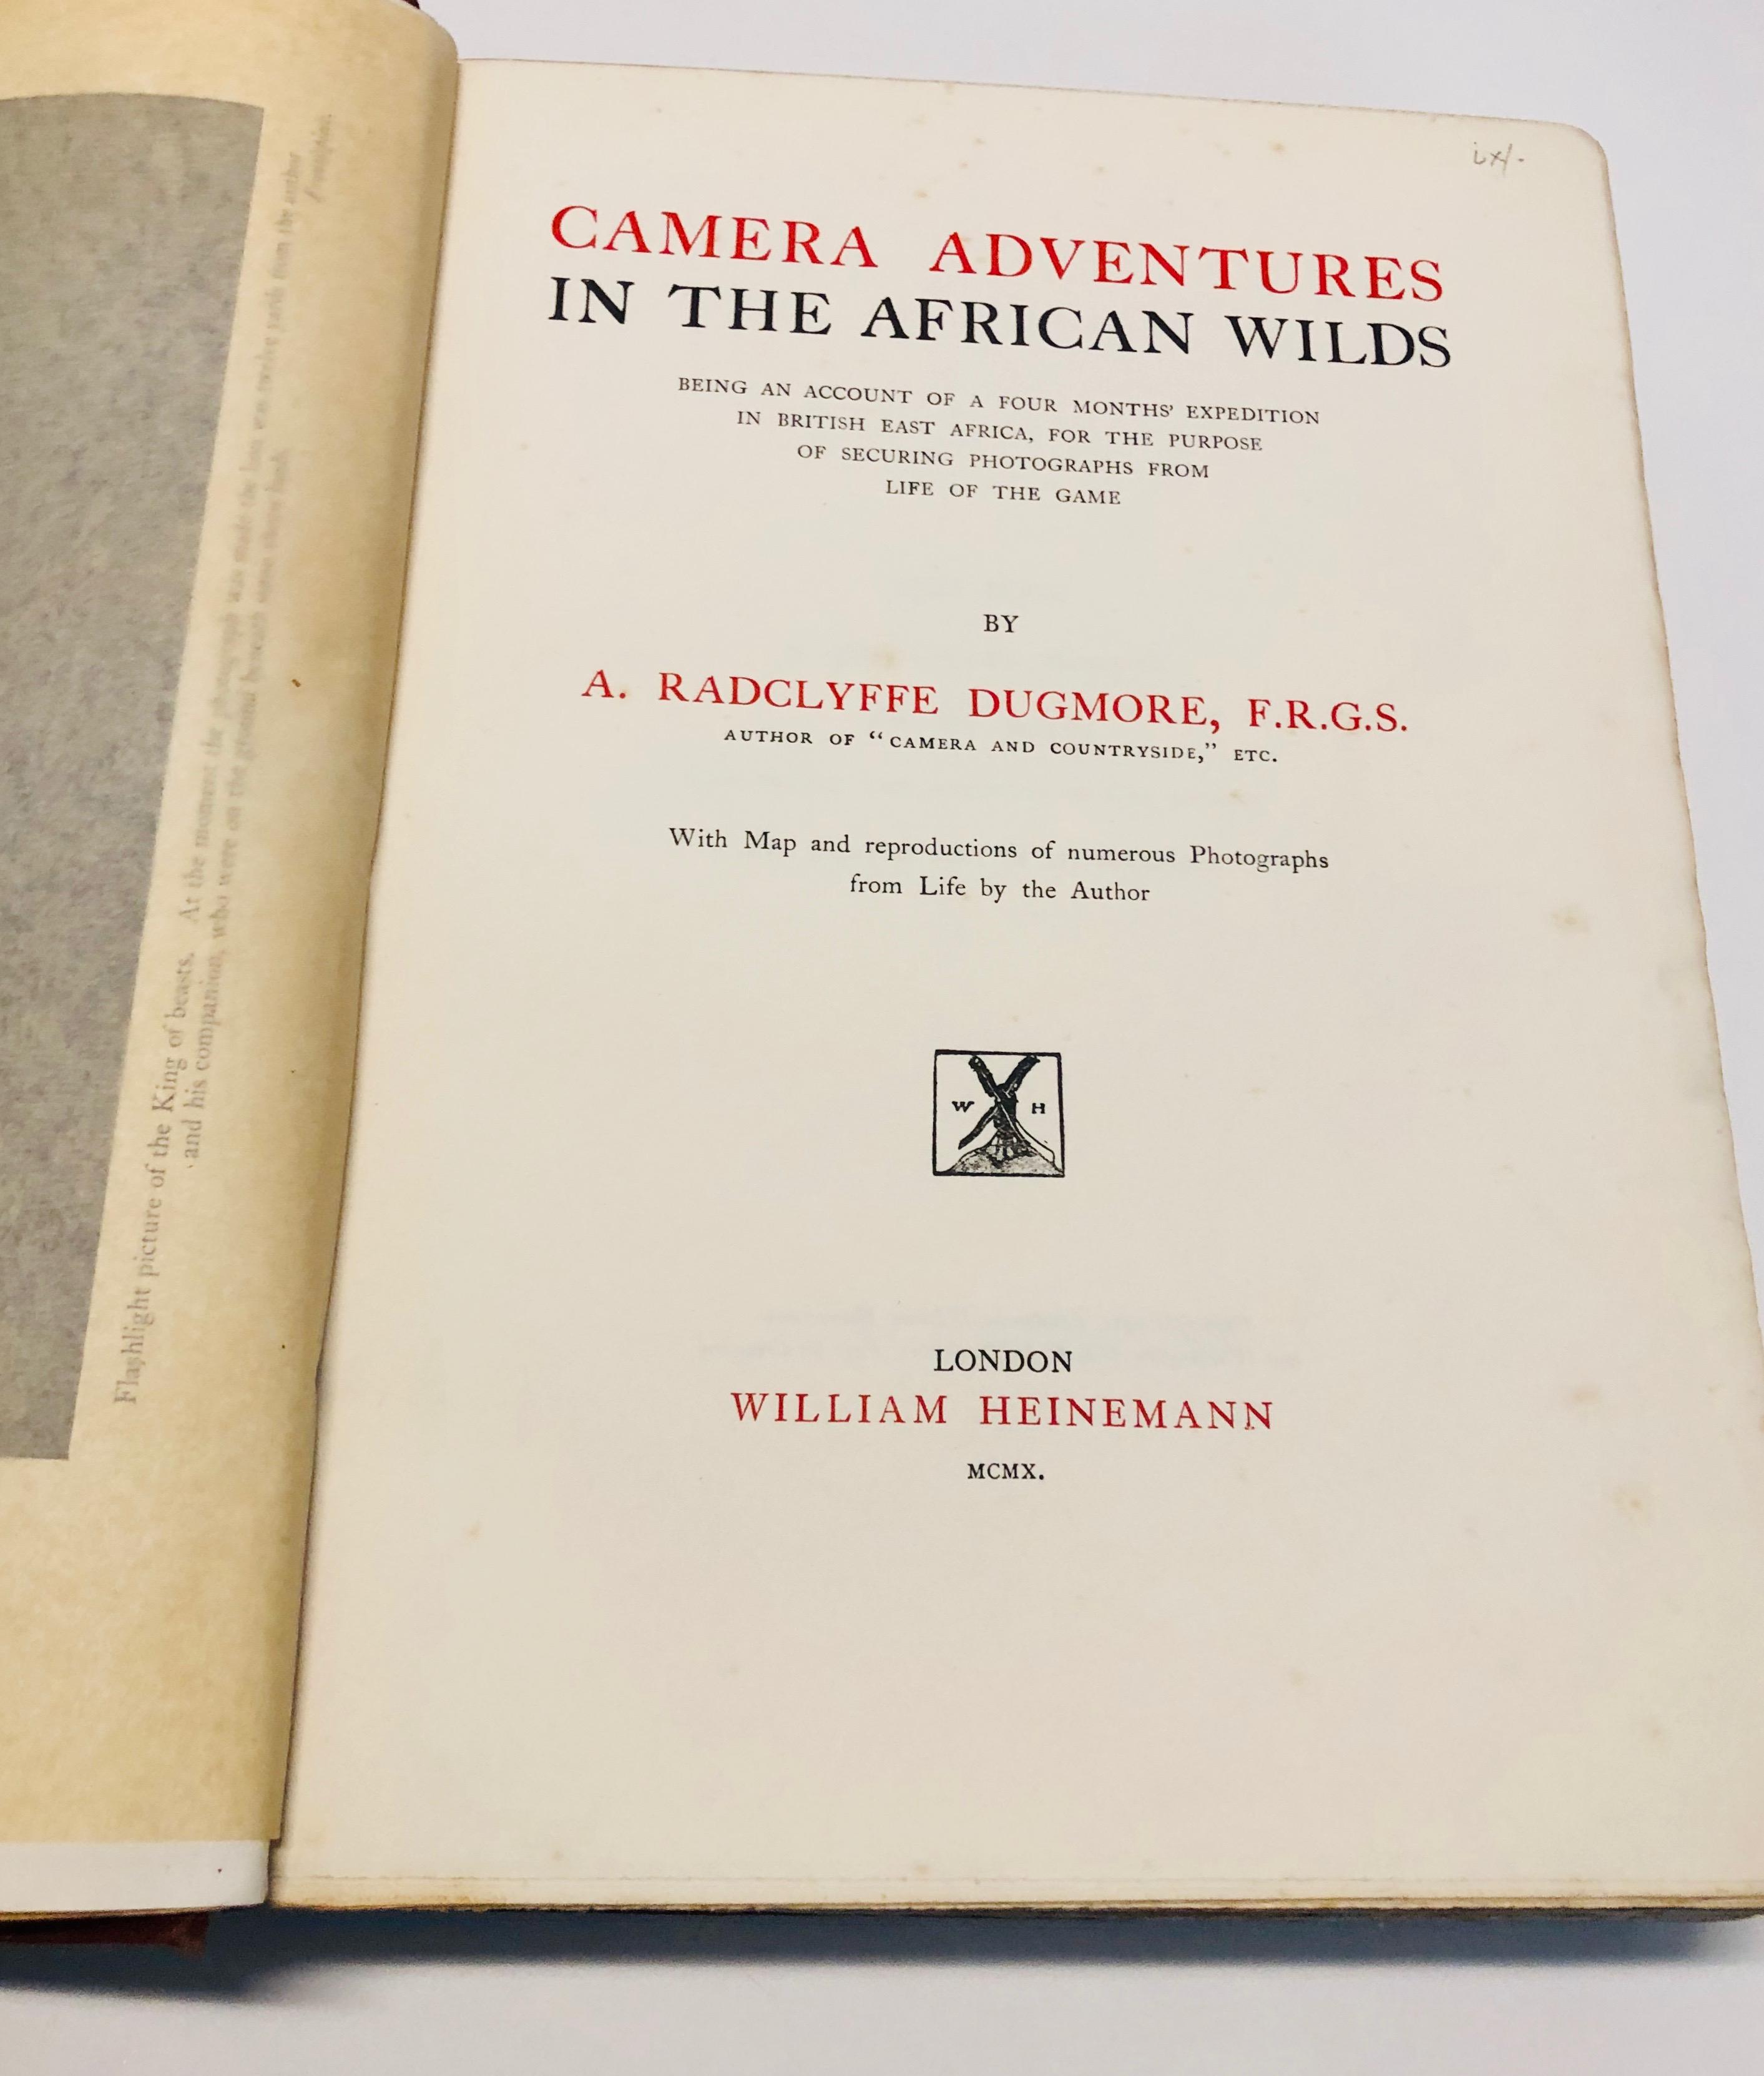 RARE CAMERA ADVENTURES IN THE AFRICAN WILDS an Account of a Expedition in British East Africa (1910)